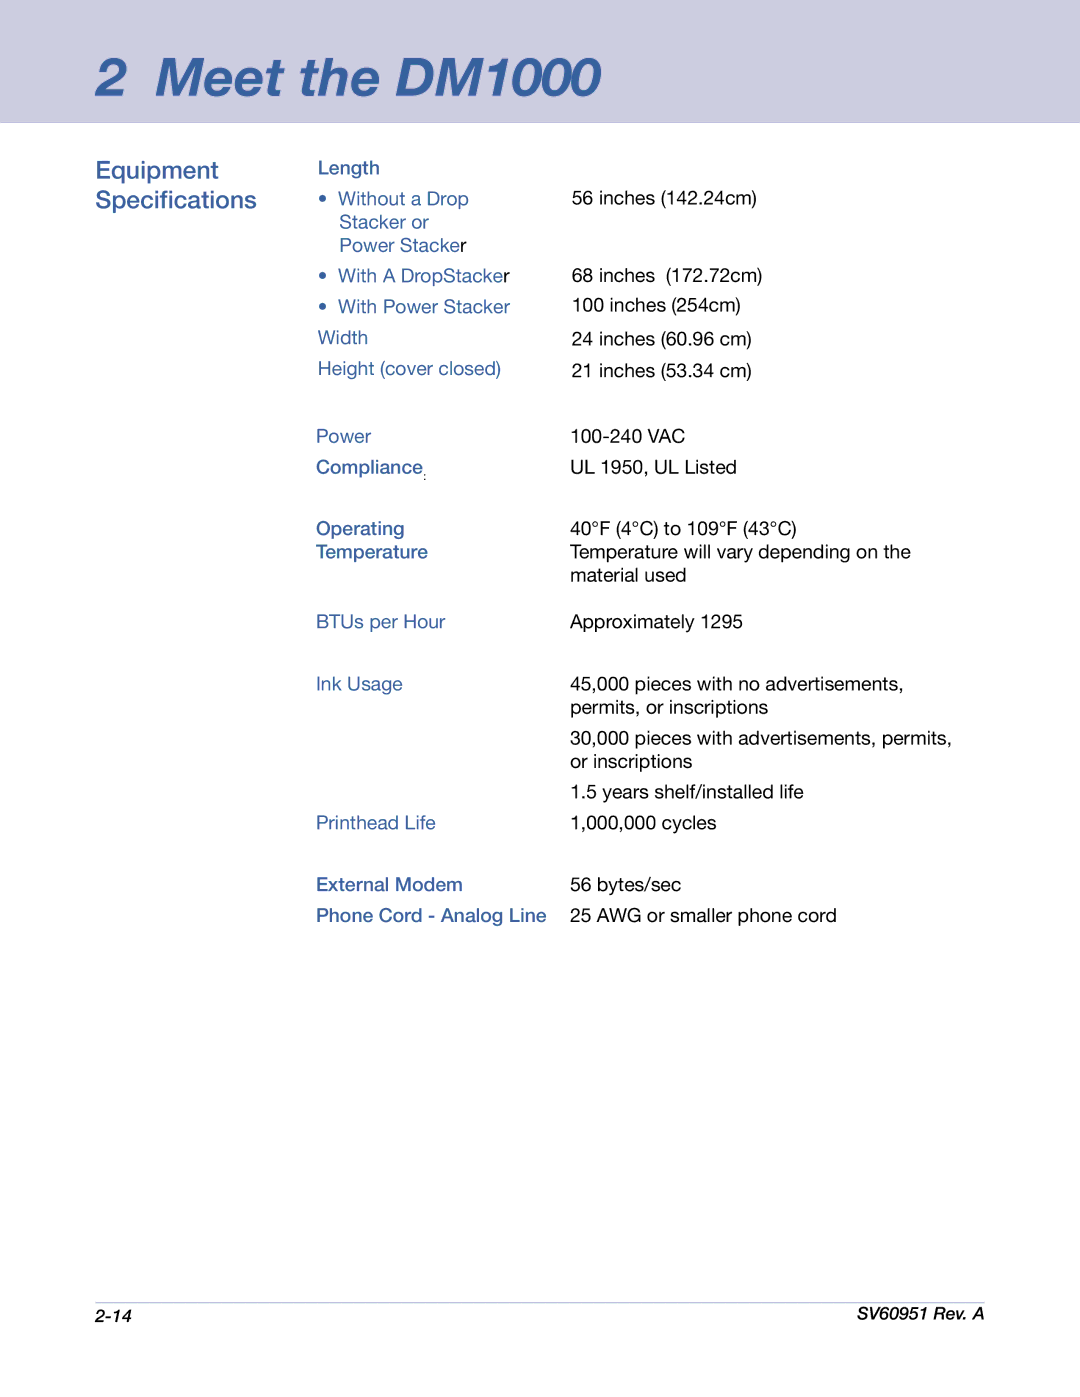 Pitney Bowes DM1000 manual Equipment Specifications 